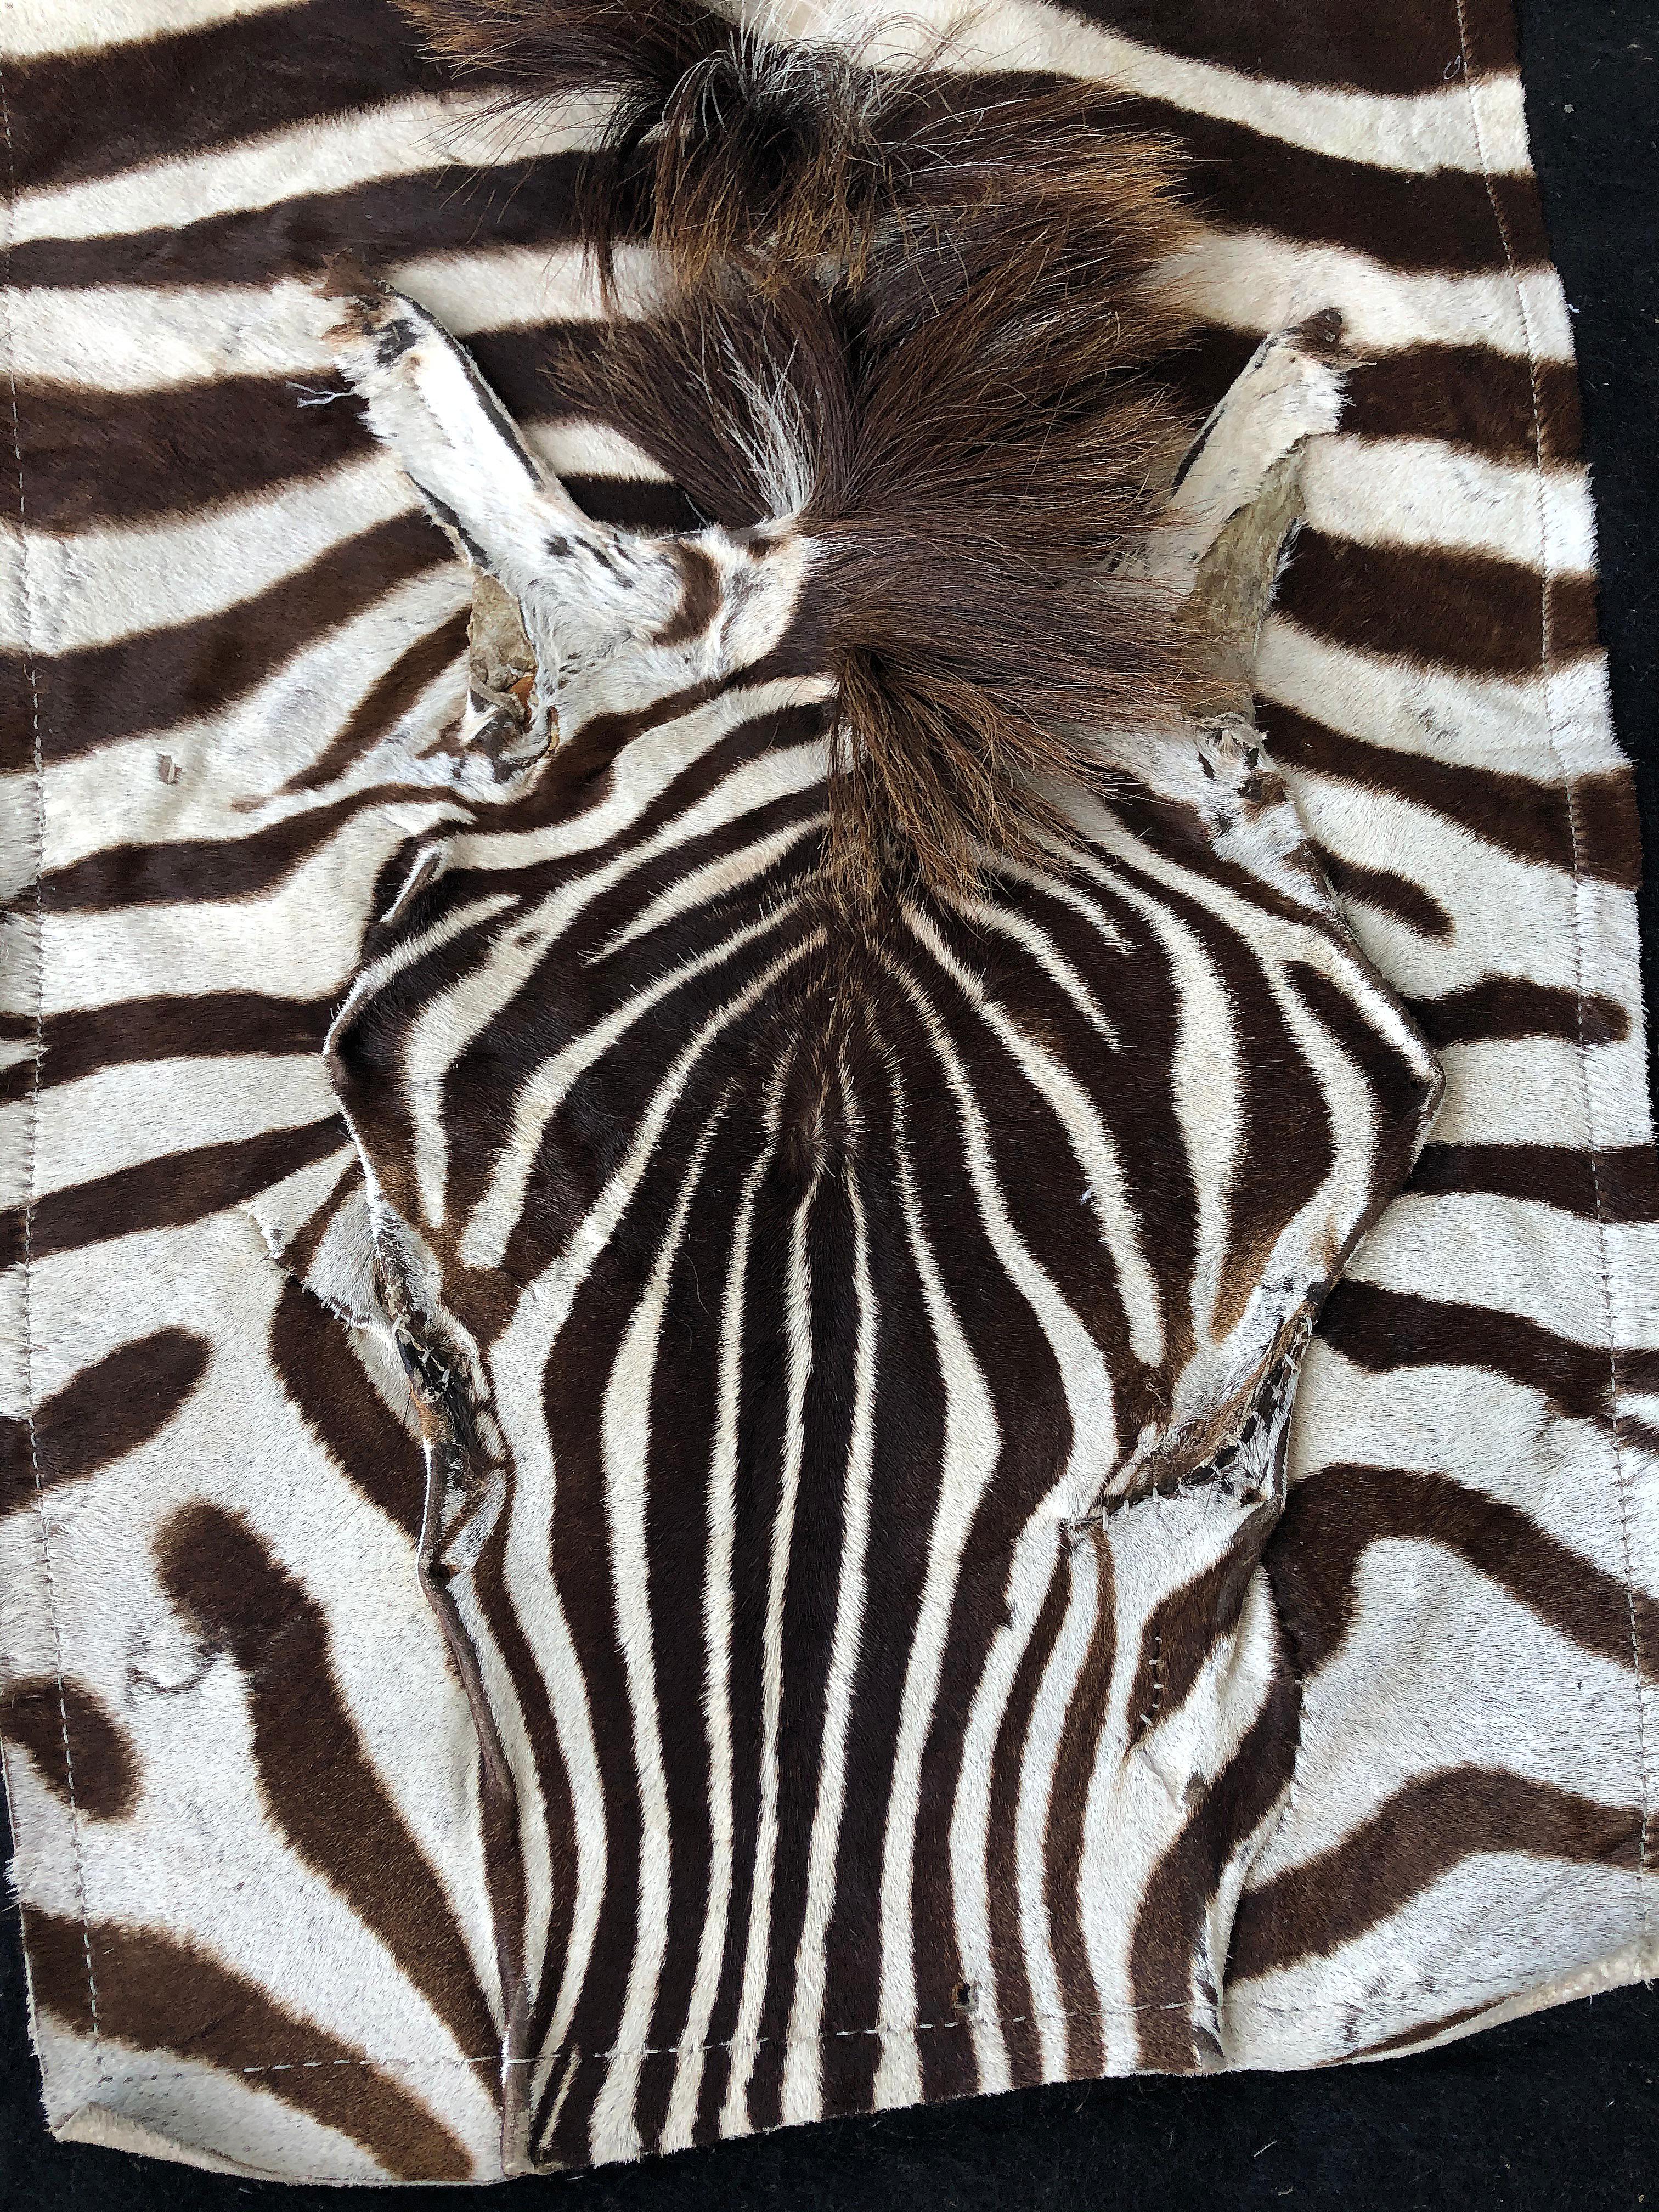 Large vintage African zebra hide taxidermy rug with felt backing

Offered for sale is a large striking African zebra hide taxidermy rug with a black felt backing. The rug retains the head and tail. It can be used on the floor or hung from the wall.